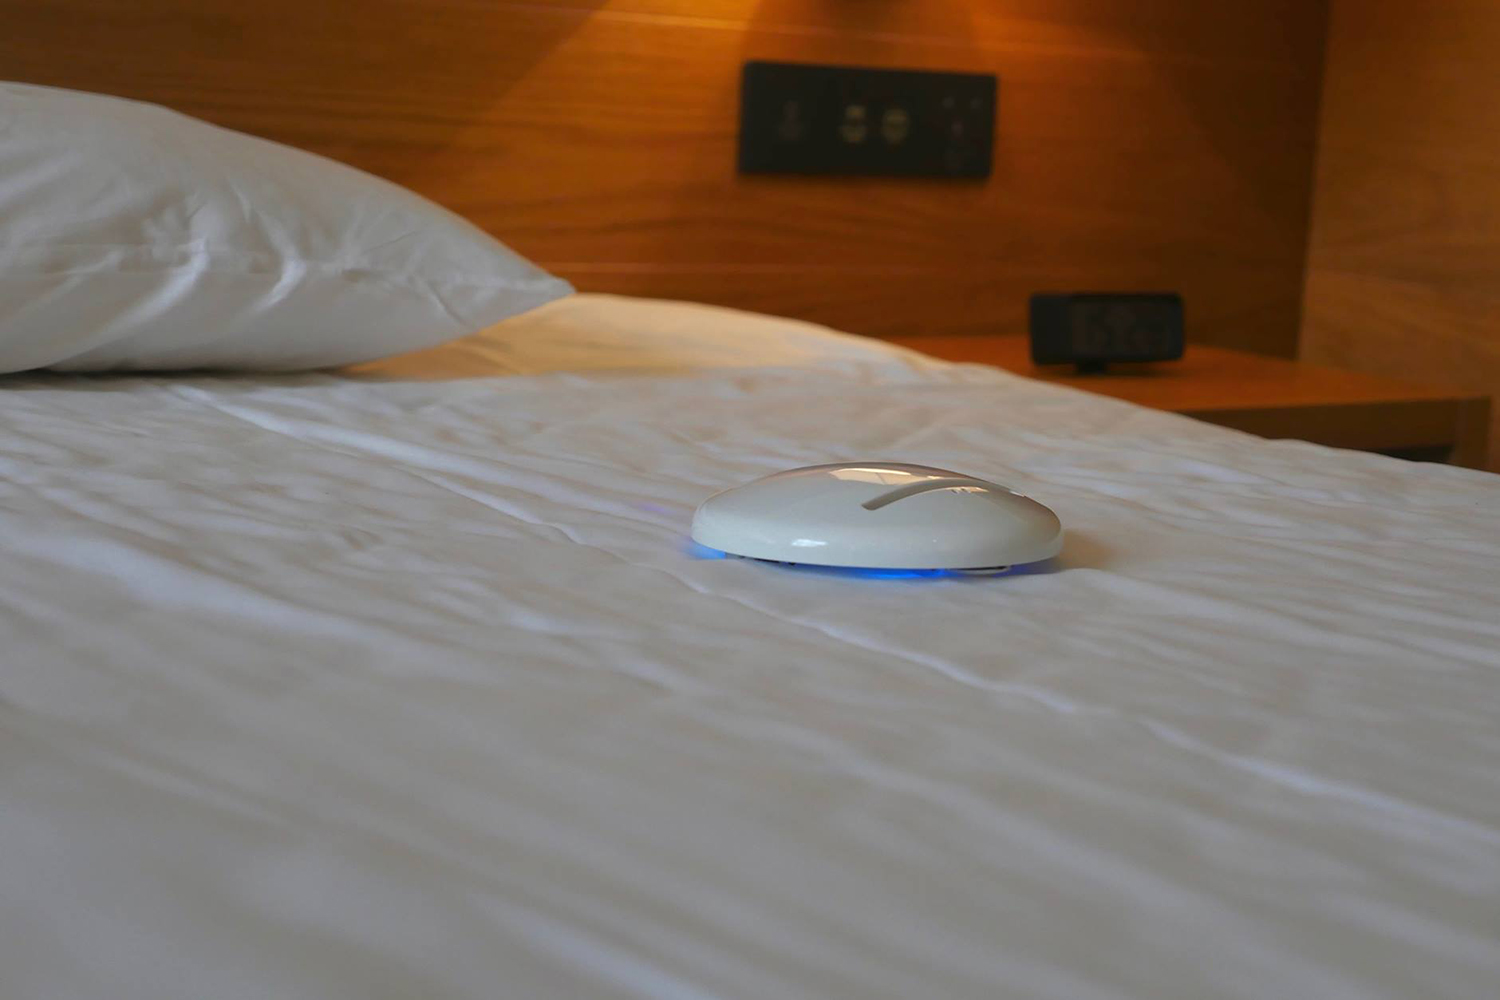 cleansebot travel robot hotel room